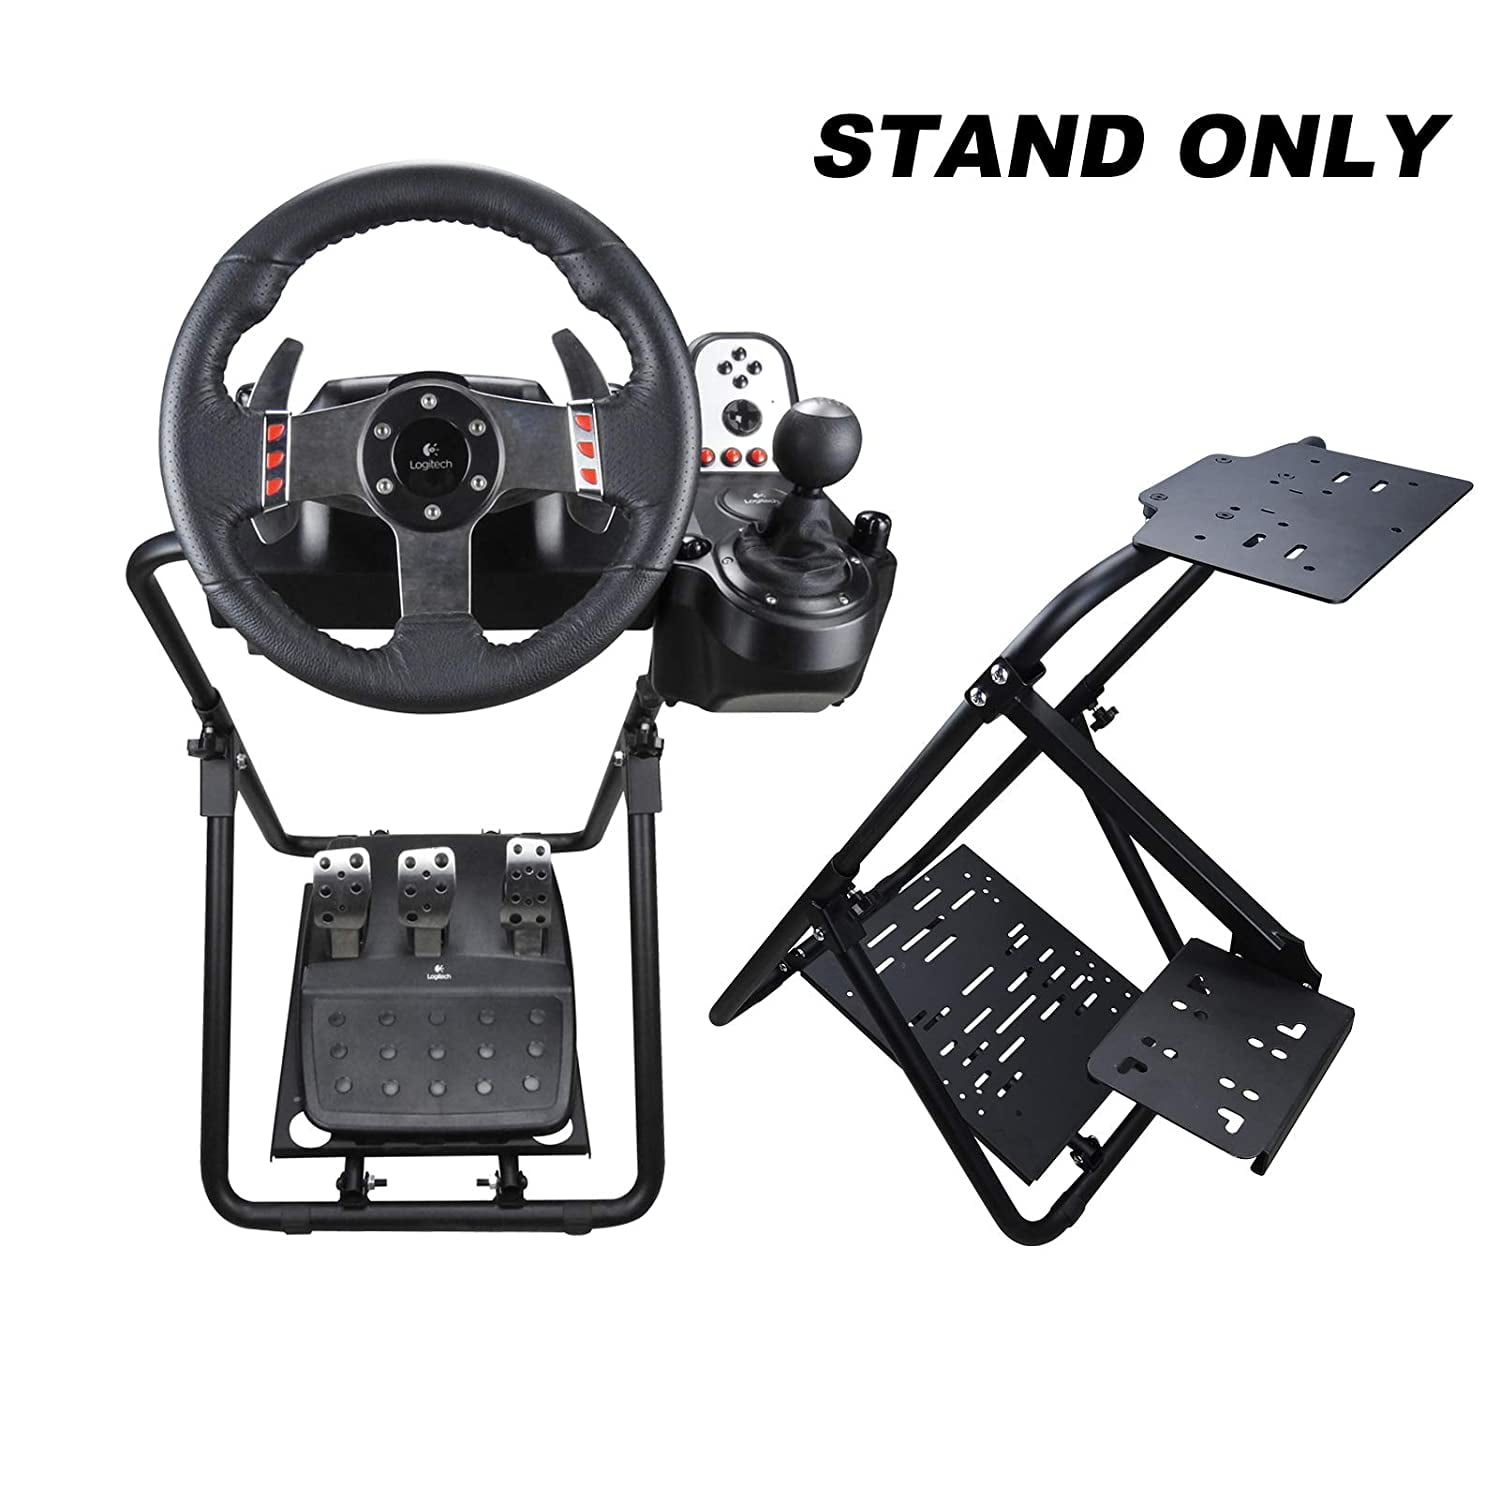 G29 G920 Racing Steering Wheel Stand,fit for Logitech G27/G25/G29,  Thrustmaster T80 T150 TX F430 Gaming Wheel Stand, Wheel Pedals NOT Included